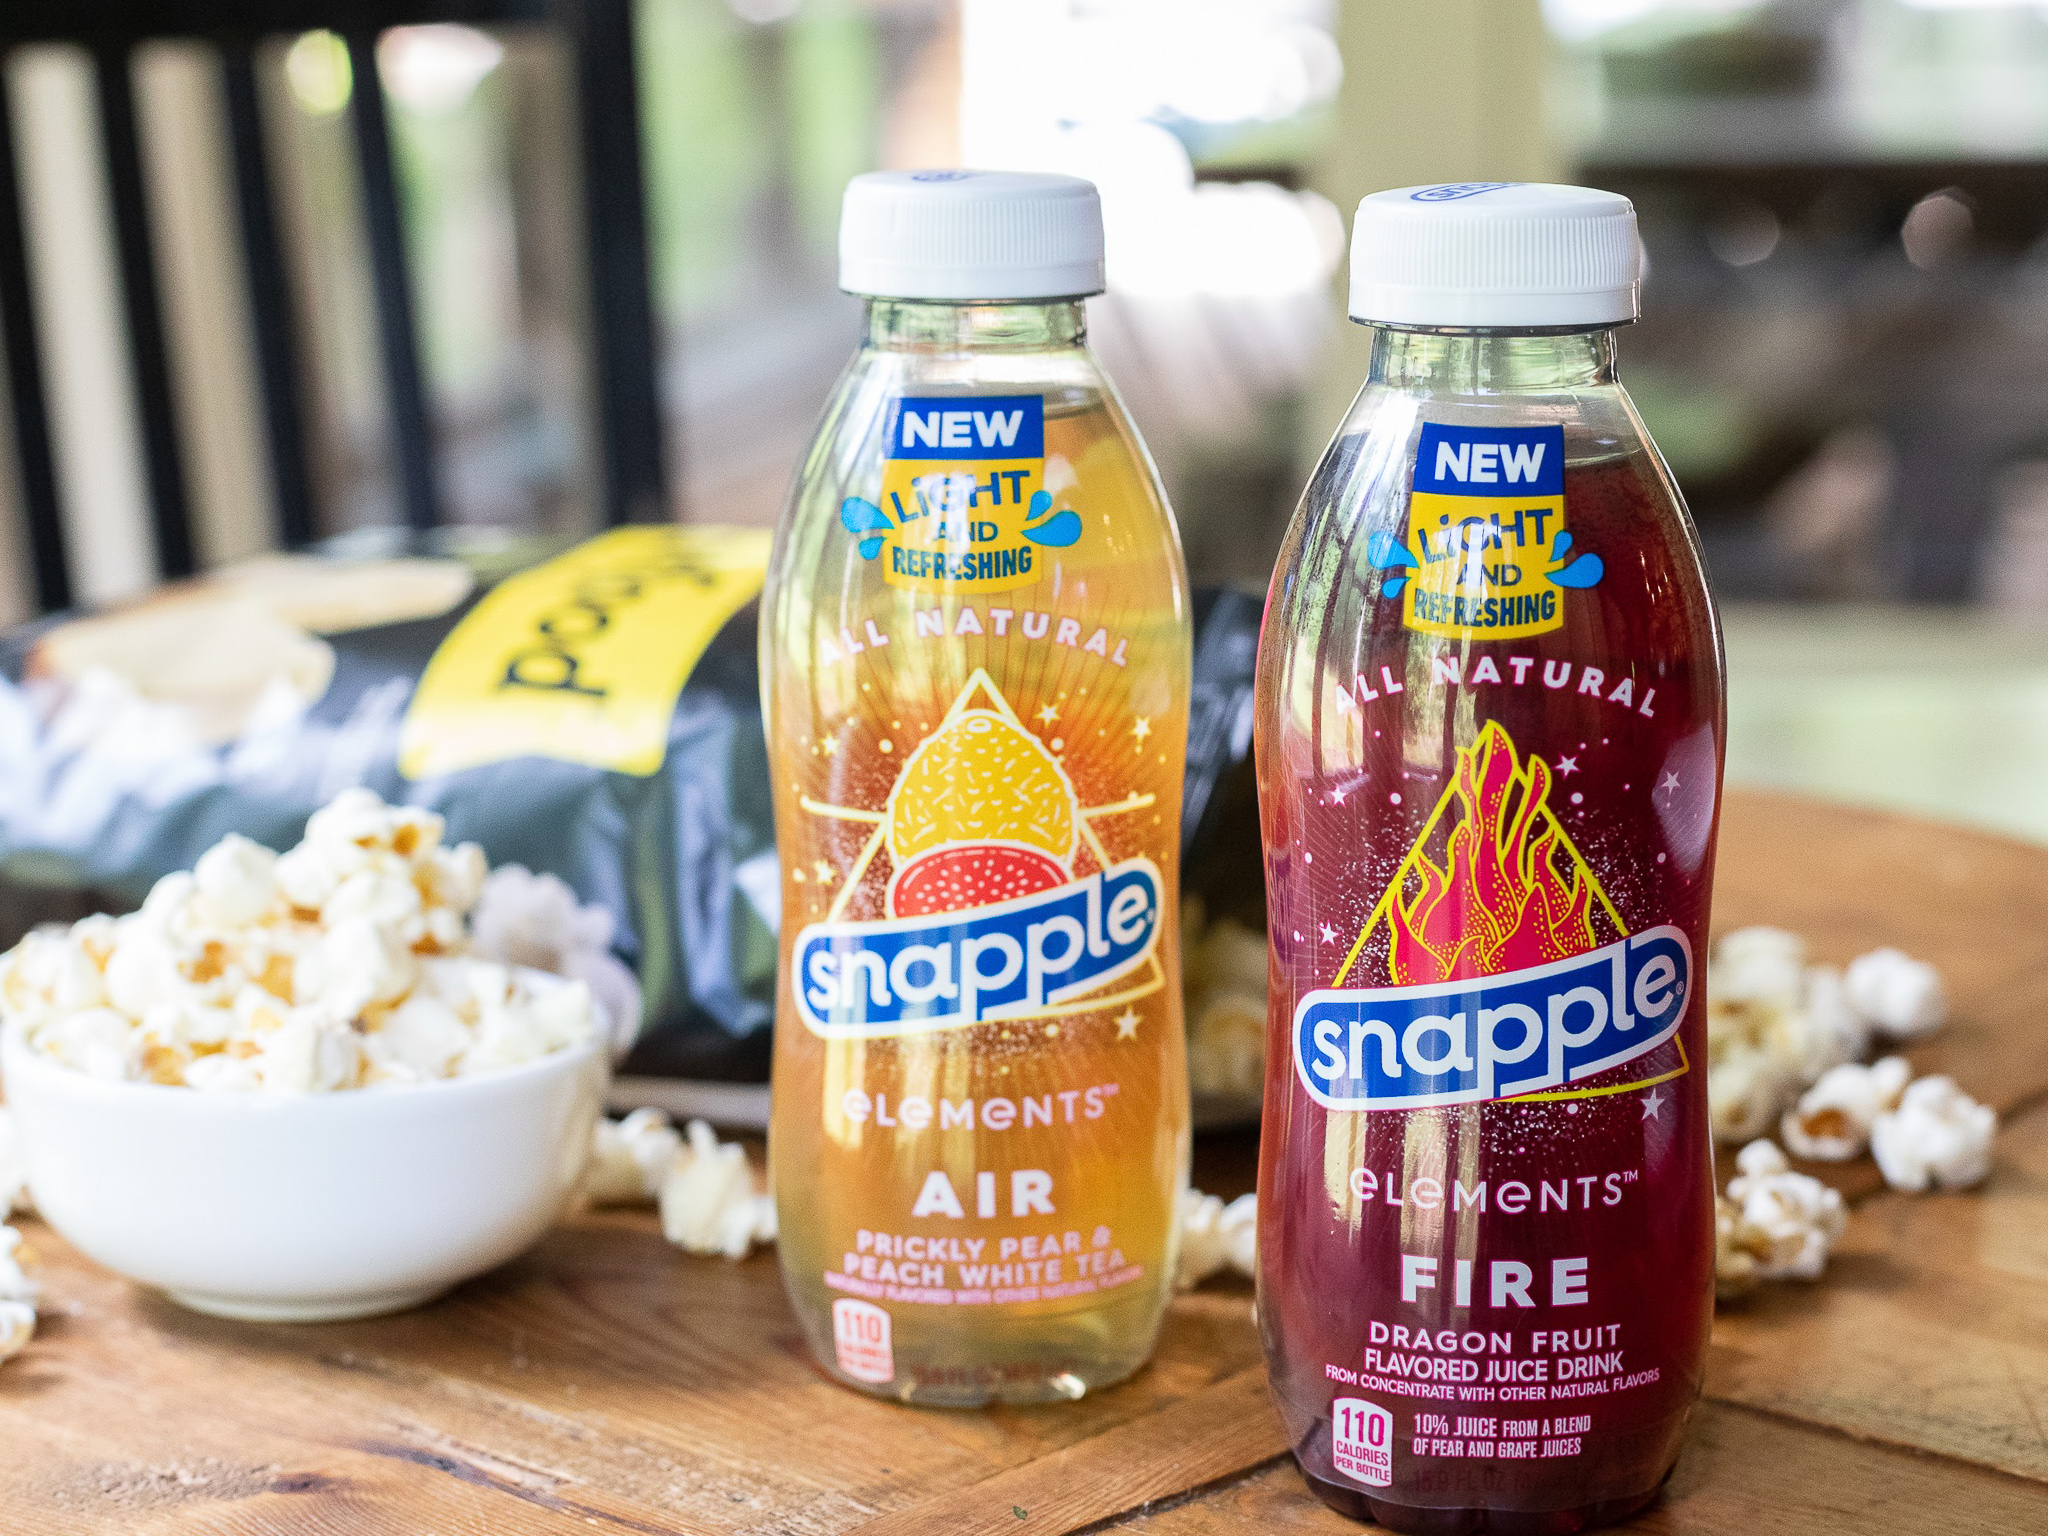 Snapple Elements Just 75¢ At Kroger – Less Than Half Price!